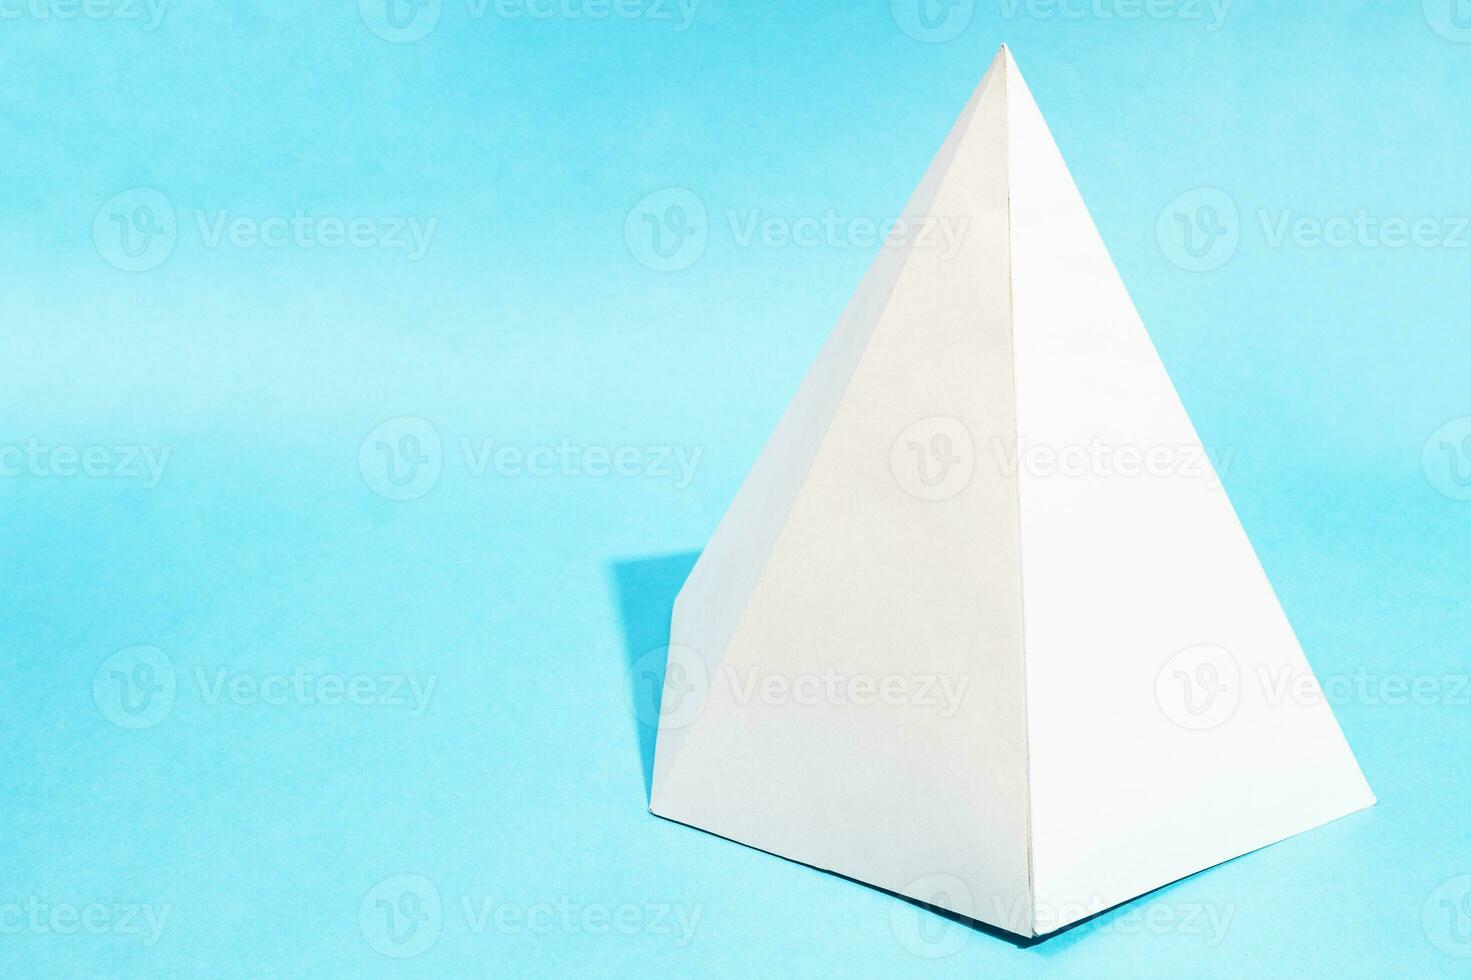 handcrafted paper hexagonal pyramid on turquoise photo